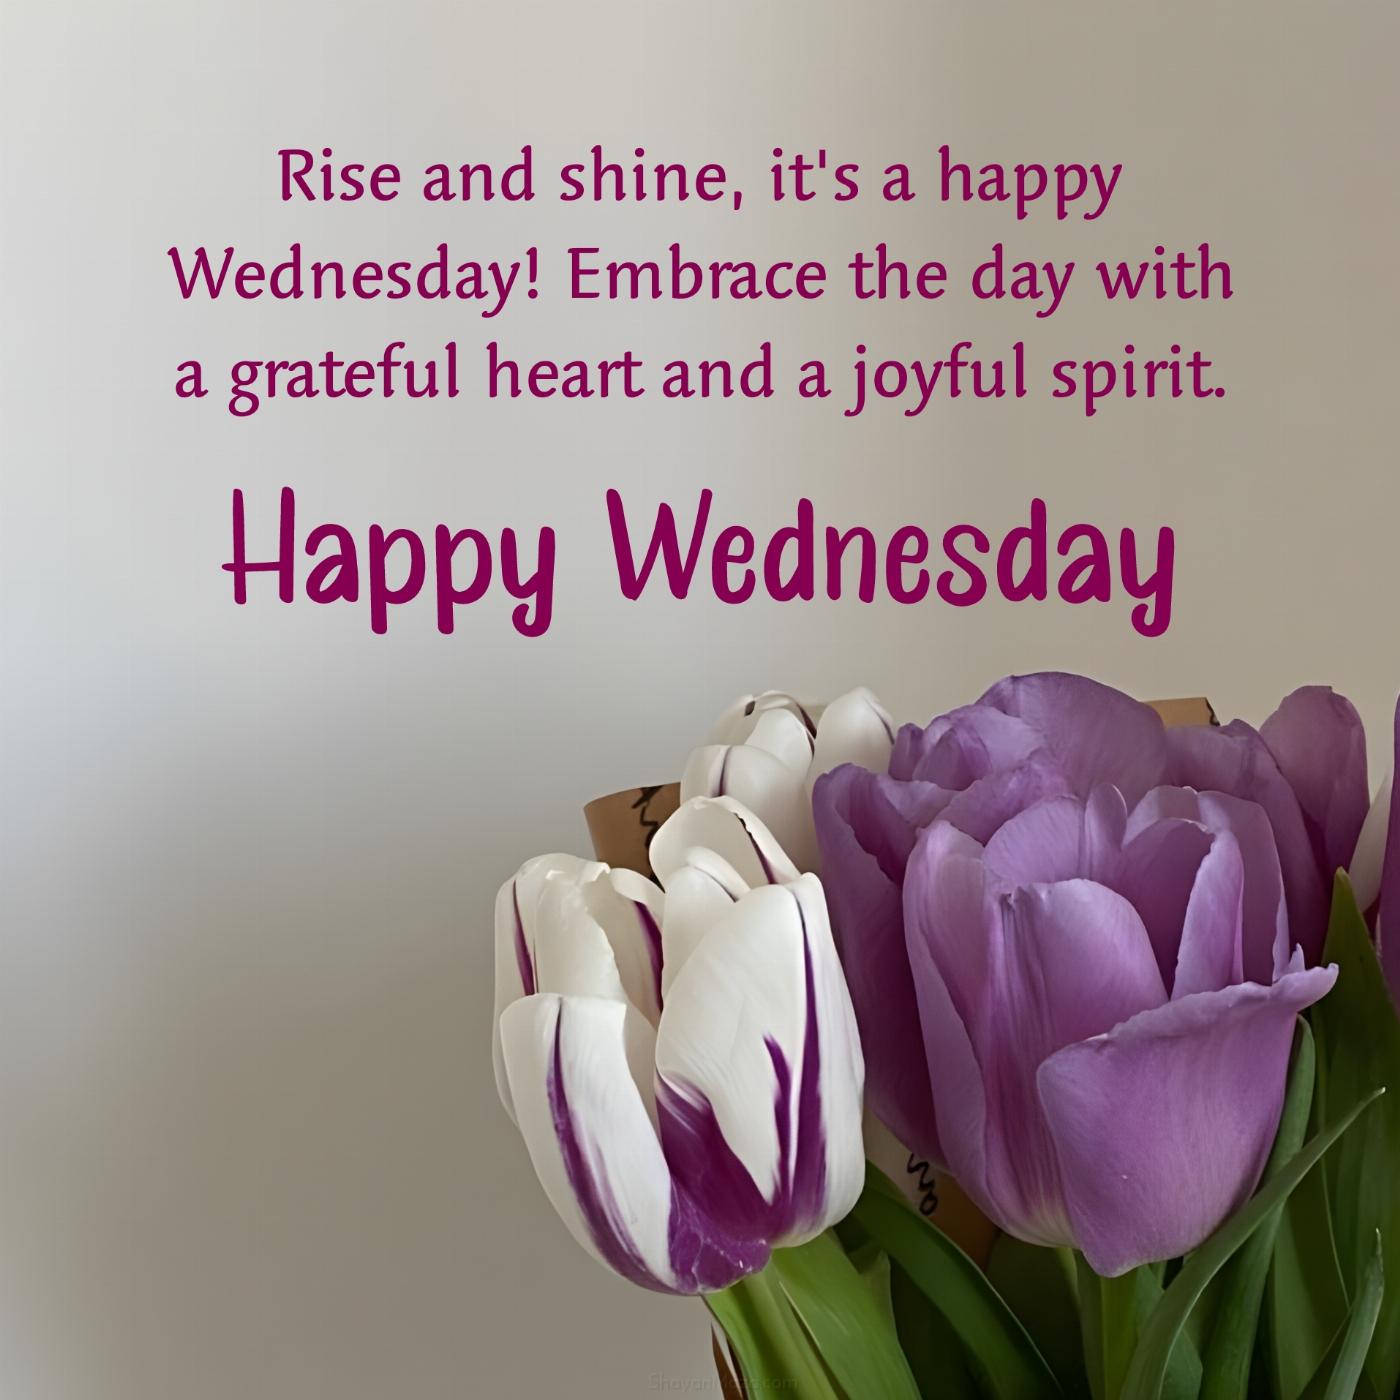 Rise and shine it's a happy Wednesday! Embrace the day